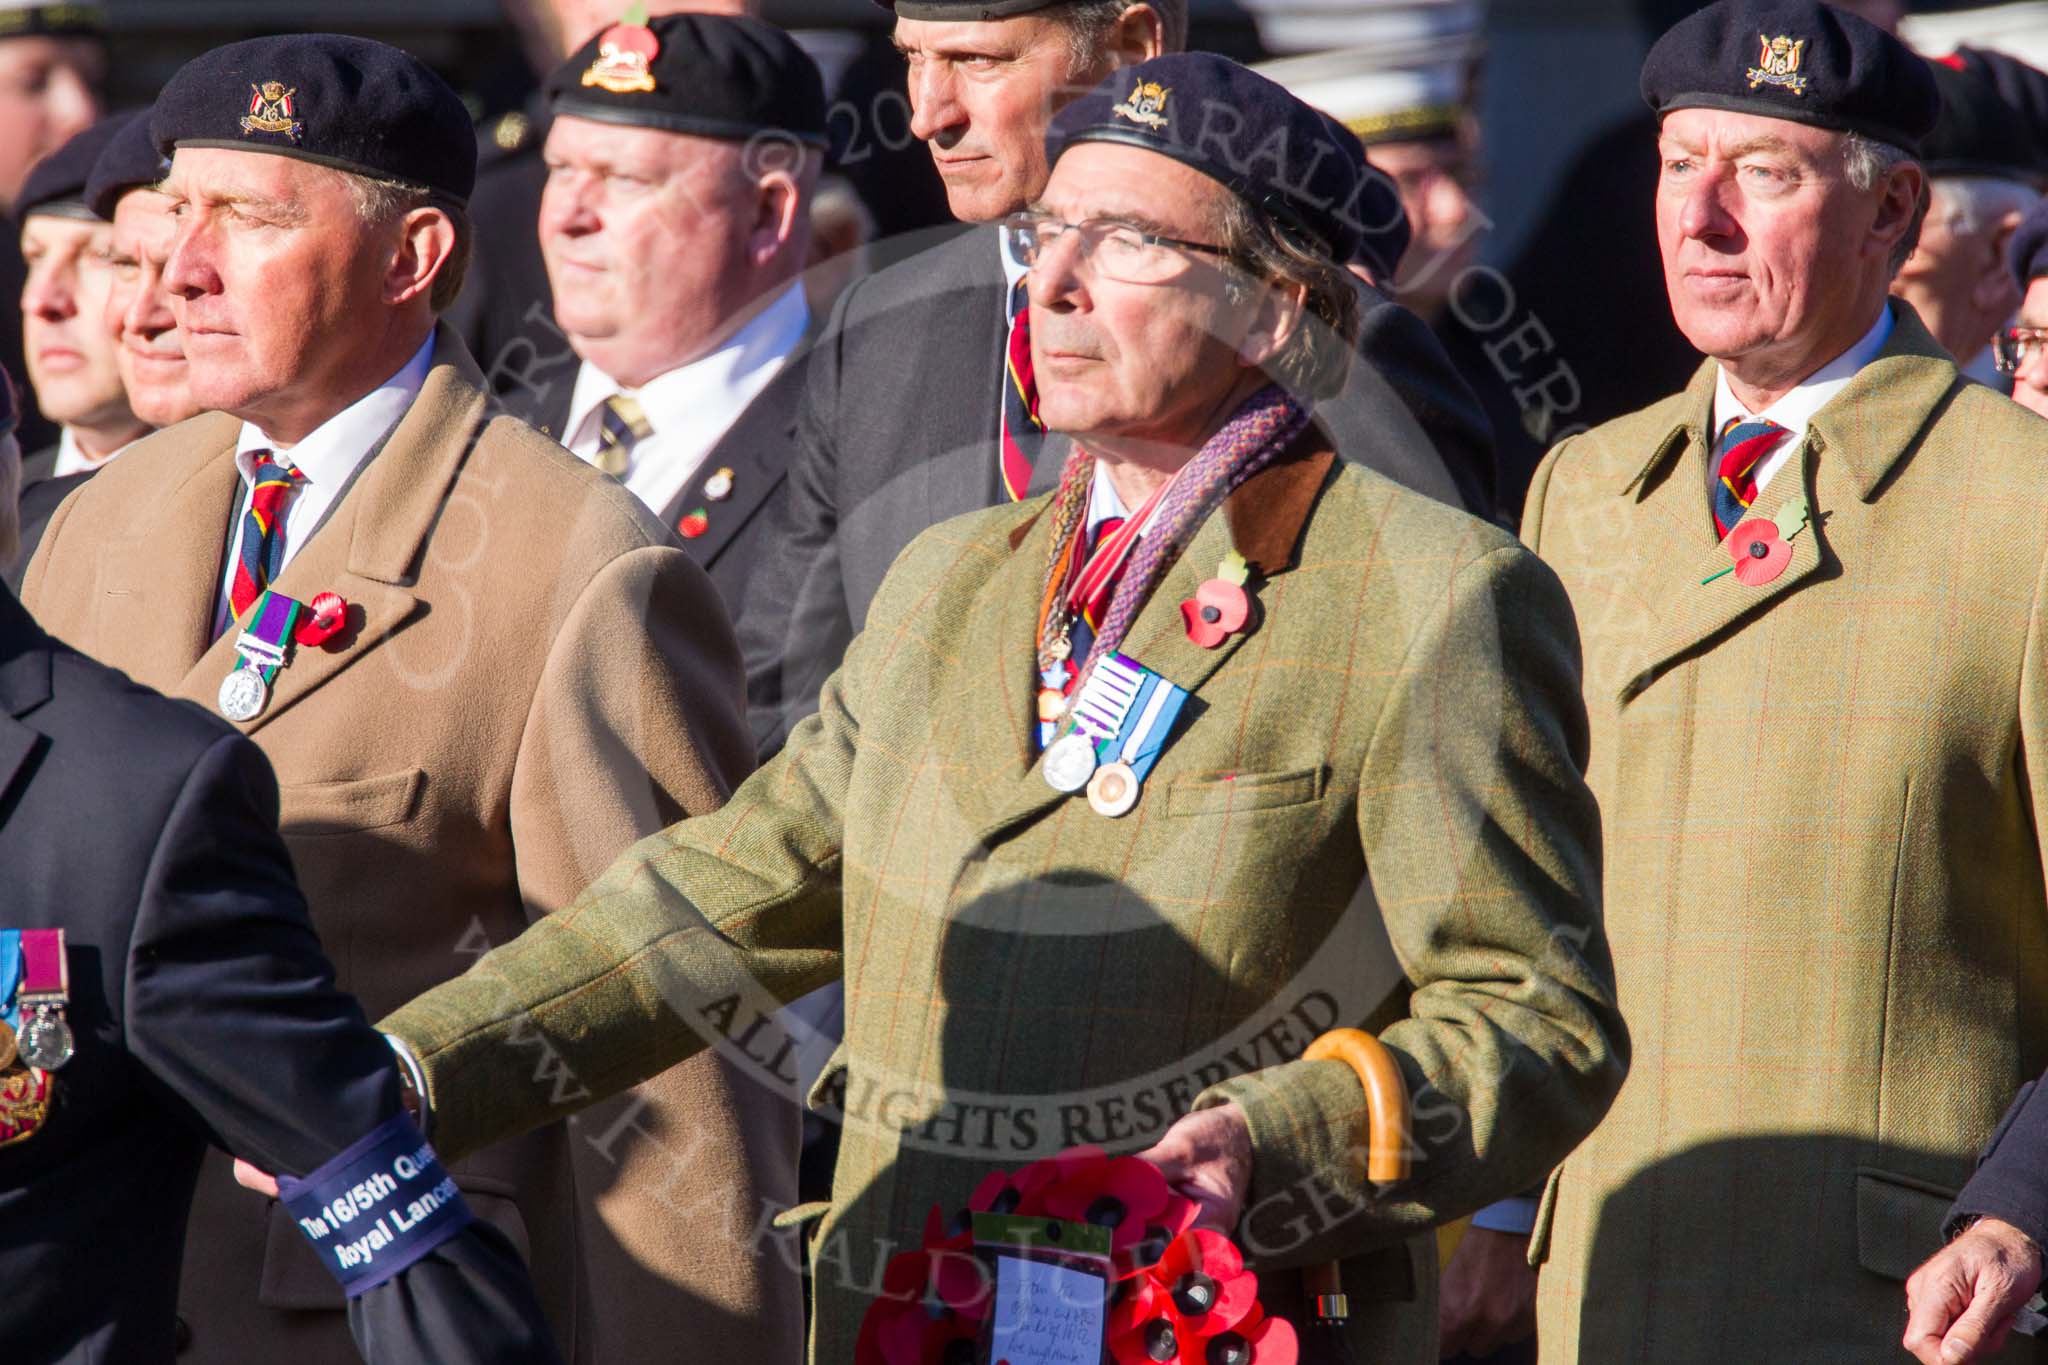 Remembrance Sunday at the Cenotaph in London 2014: Group B30 - 16/5th Queen's Royal Lancers.
Press stand opposite the Foreign Office building, Whitehall, London SW1,
London,
Greater London,
United Kingdom,
on 09 November 2014 at 12:13, image #1880